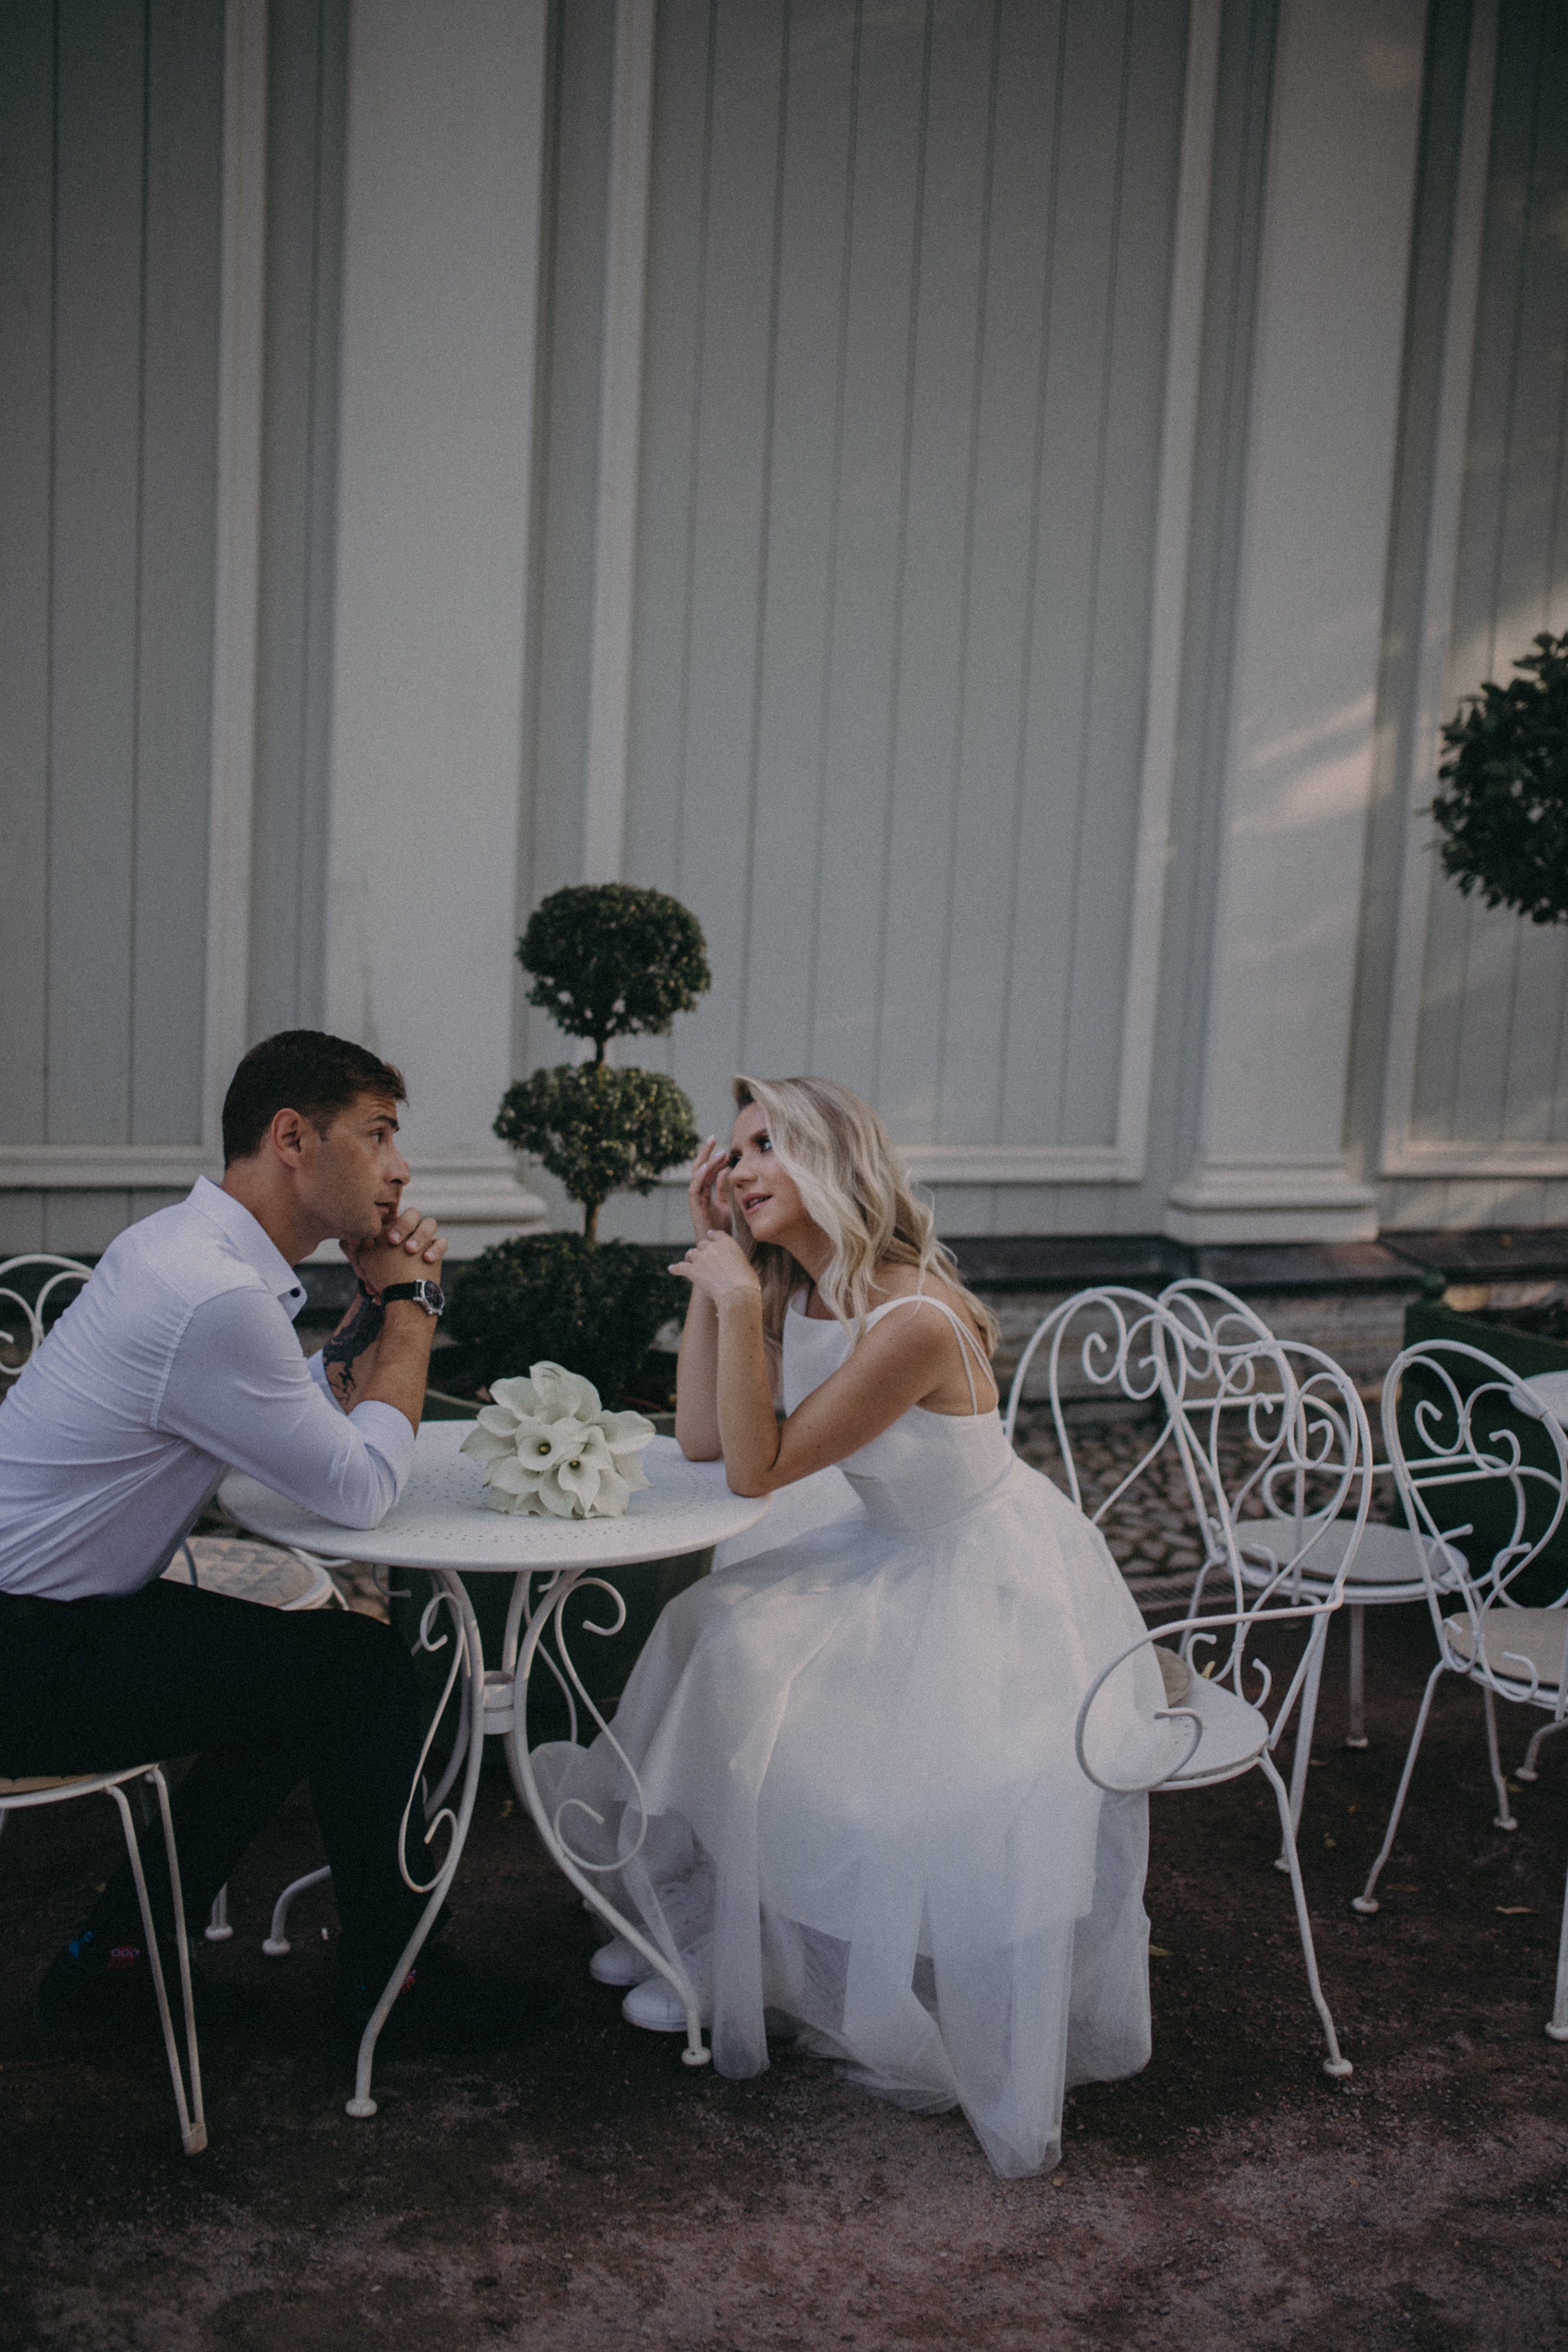 Newlywed couple conversing while seated | Source: Pexels